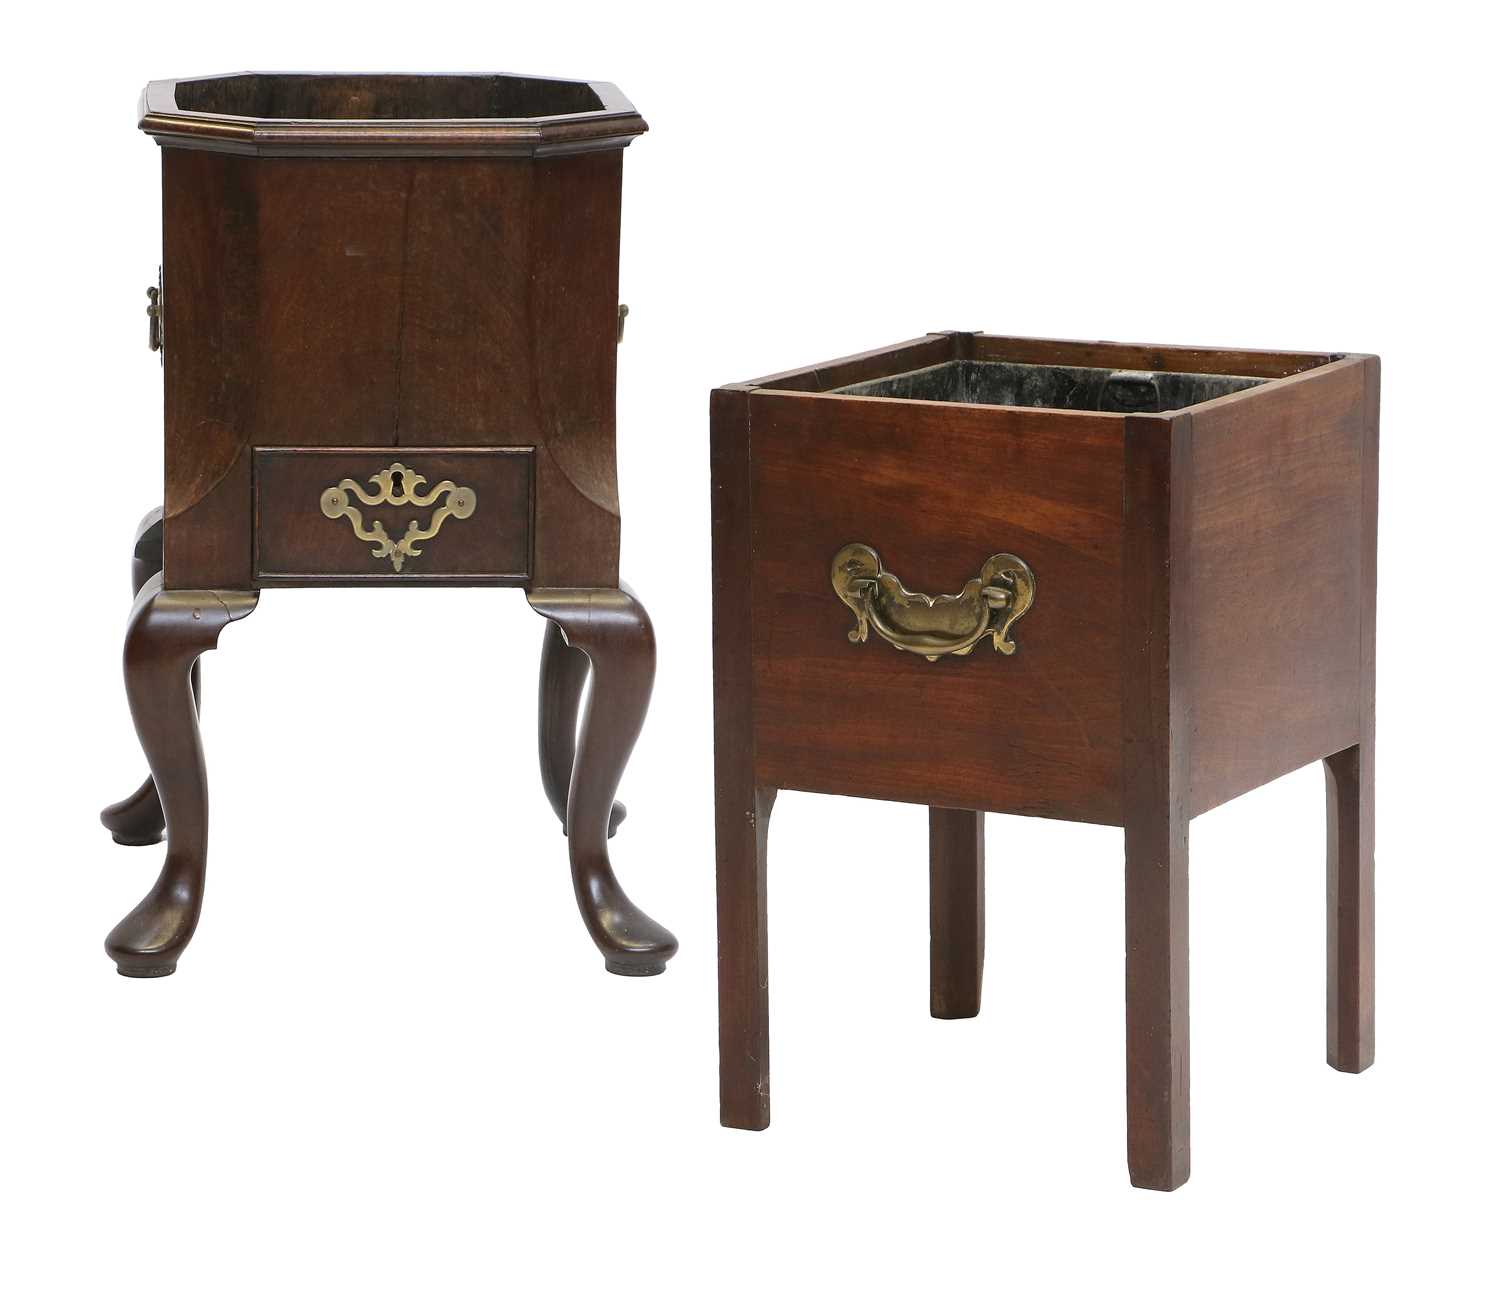 A George III Mahogany Planter, late 18th century, of octagonal-shaped form with brass carrying - Image 2 of 8